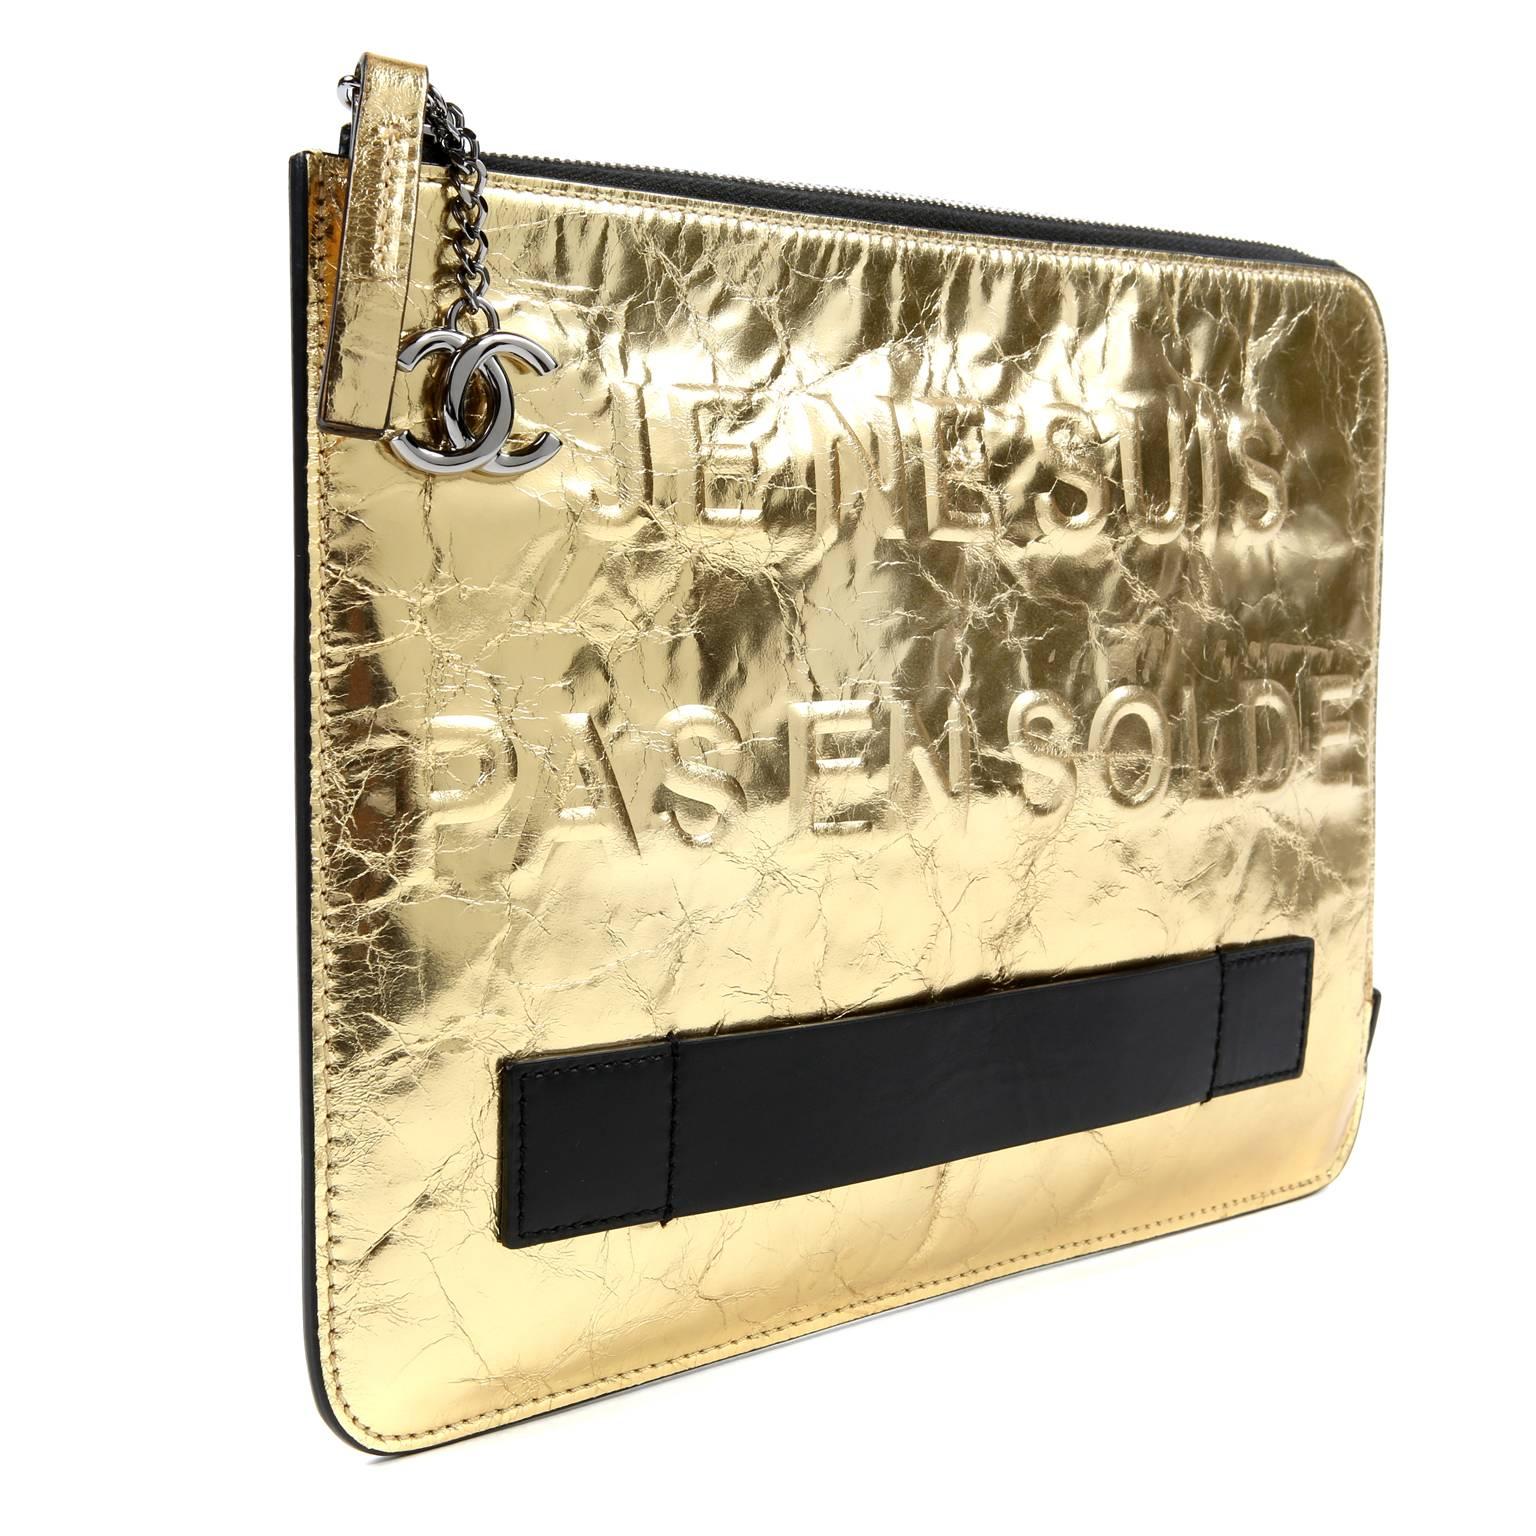 Chanel Gold Je Ne Suis Pas En Solde Clutch- PRISTINE
 From the 2015 collection, it proudly proclaims, en Francais, “I am Not For Sale.”

Metallic gold leather slim clutch is tonally embossed with JE NE SUIS PAS EN SOLDE.  Silver interlocking CC